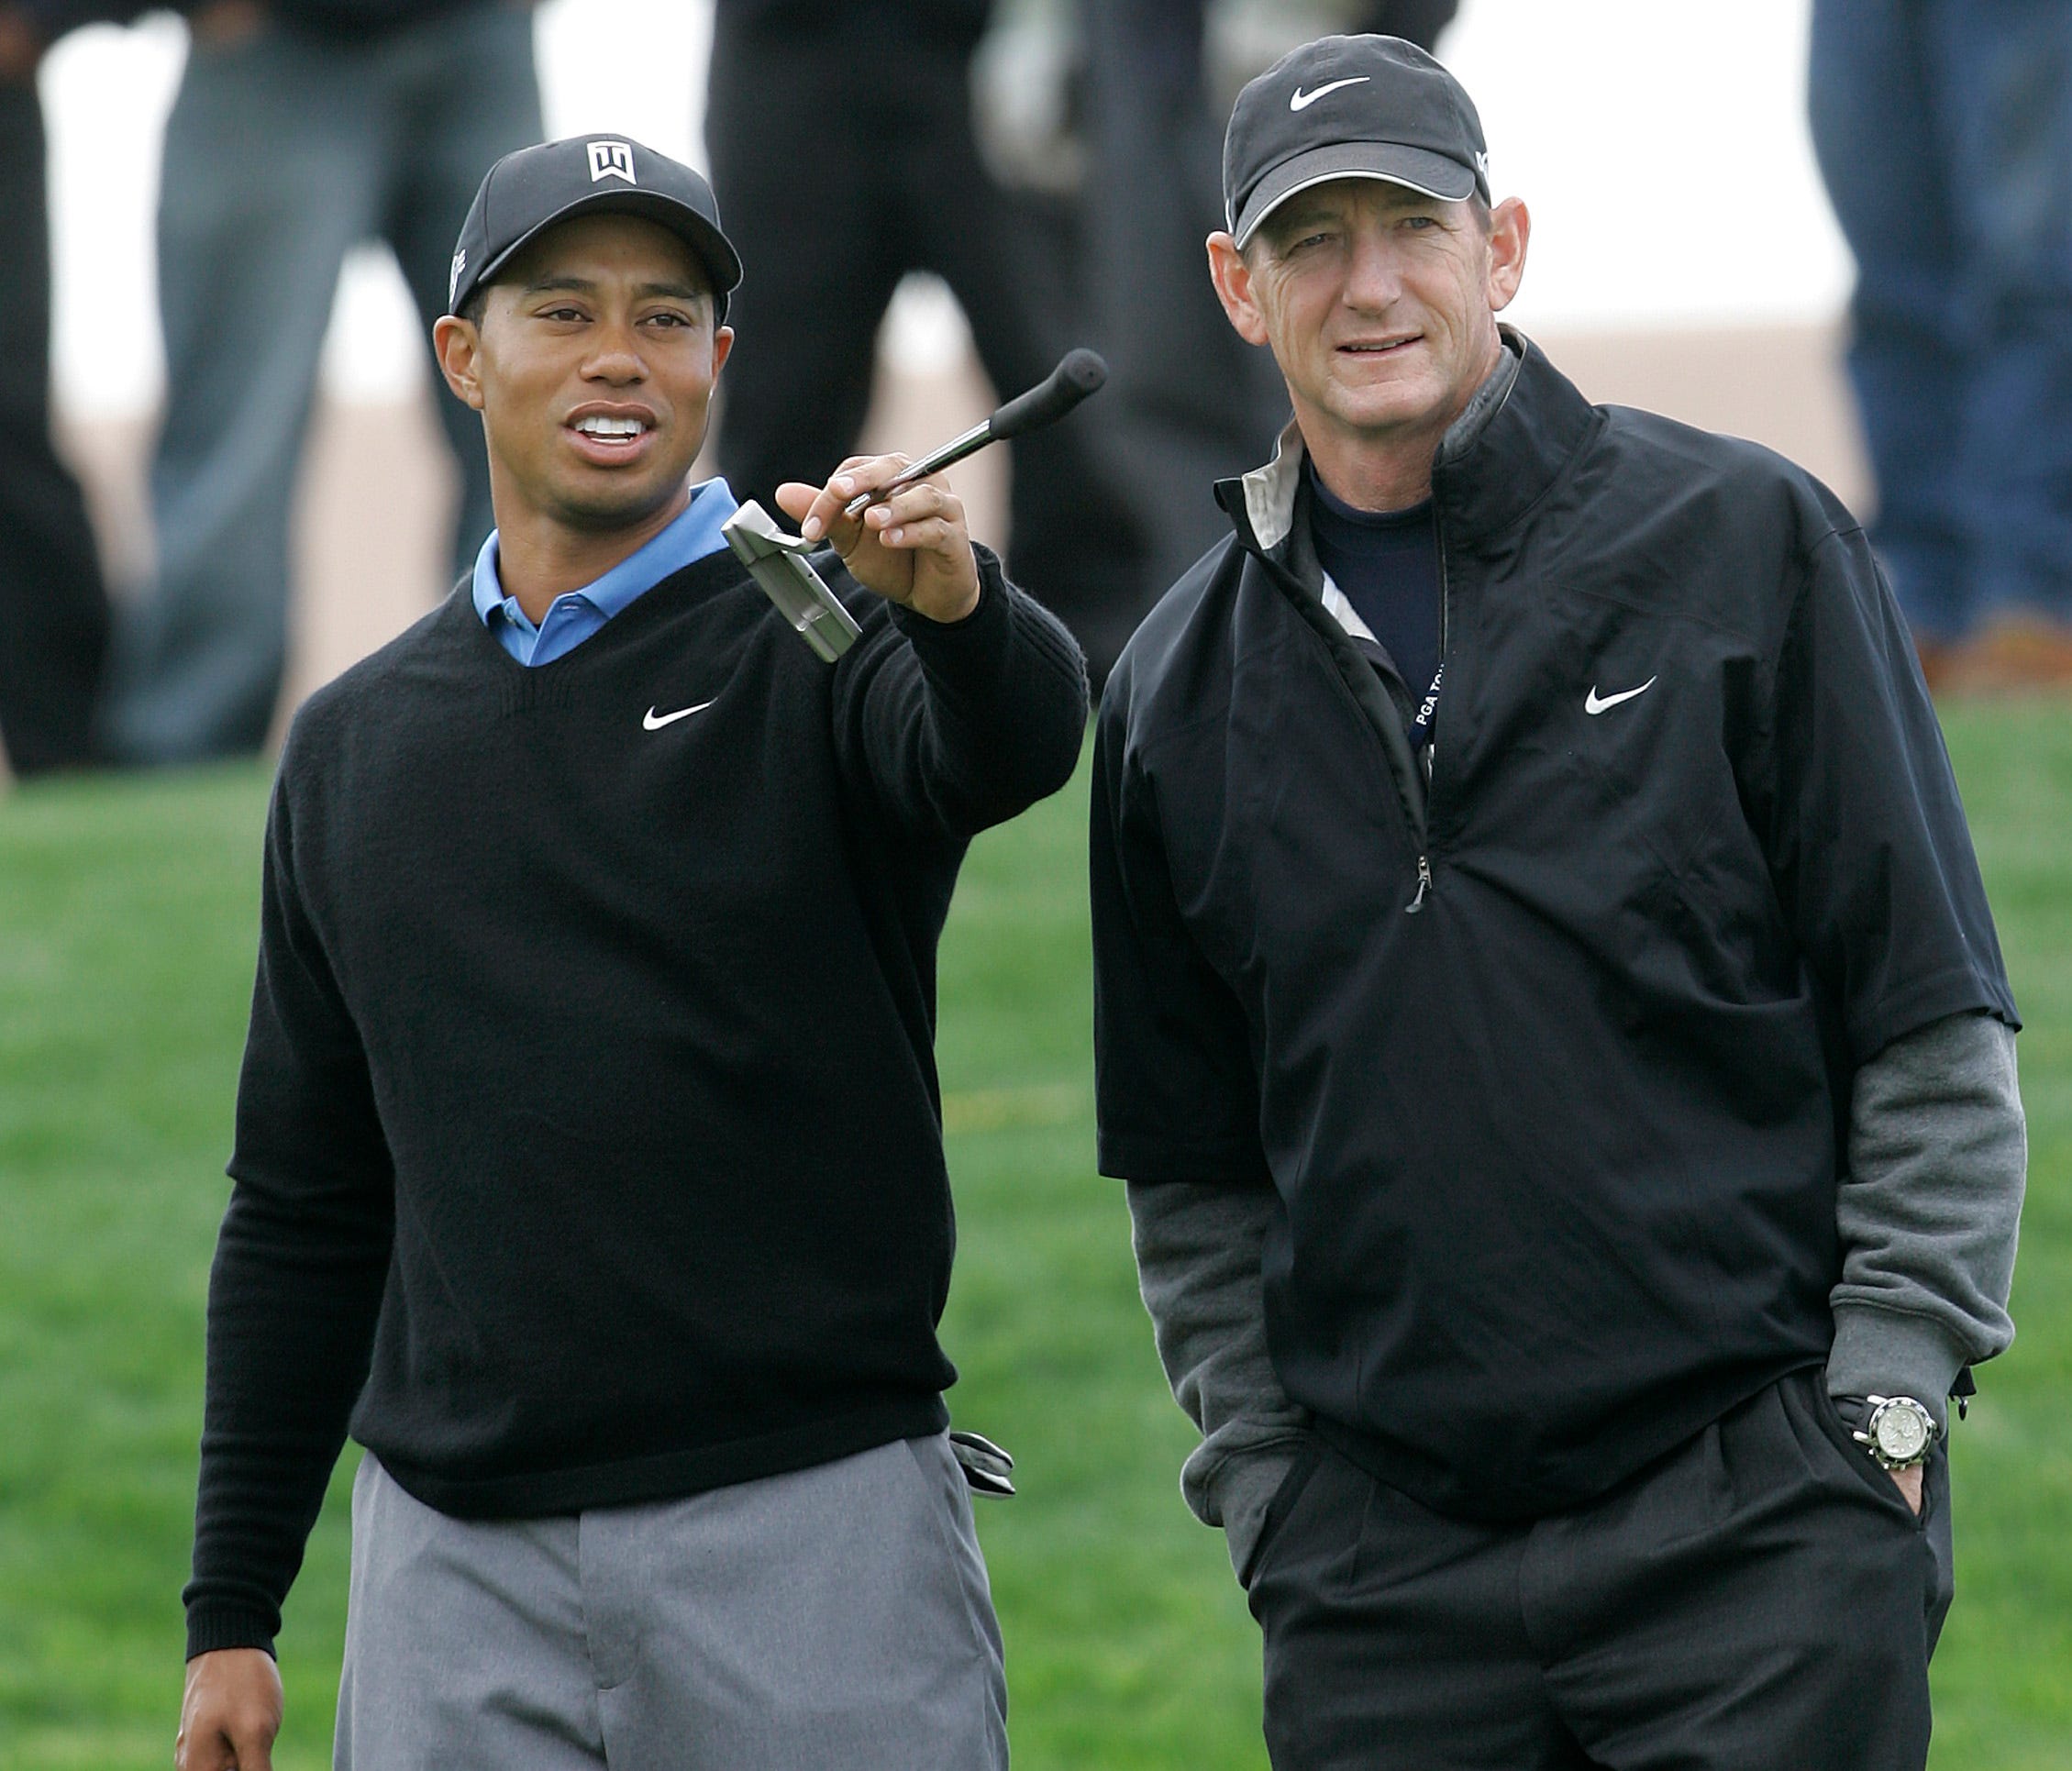 Tiger Woods uses his putter to indicate a point of interest to ex-coach Hank Haney during a practice session for the World Golf Championships in 2007.